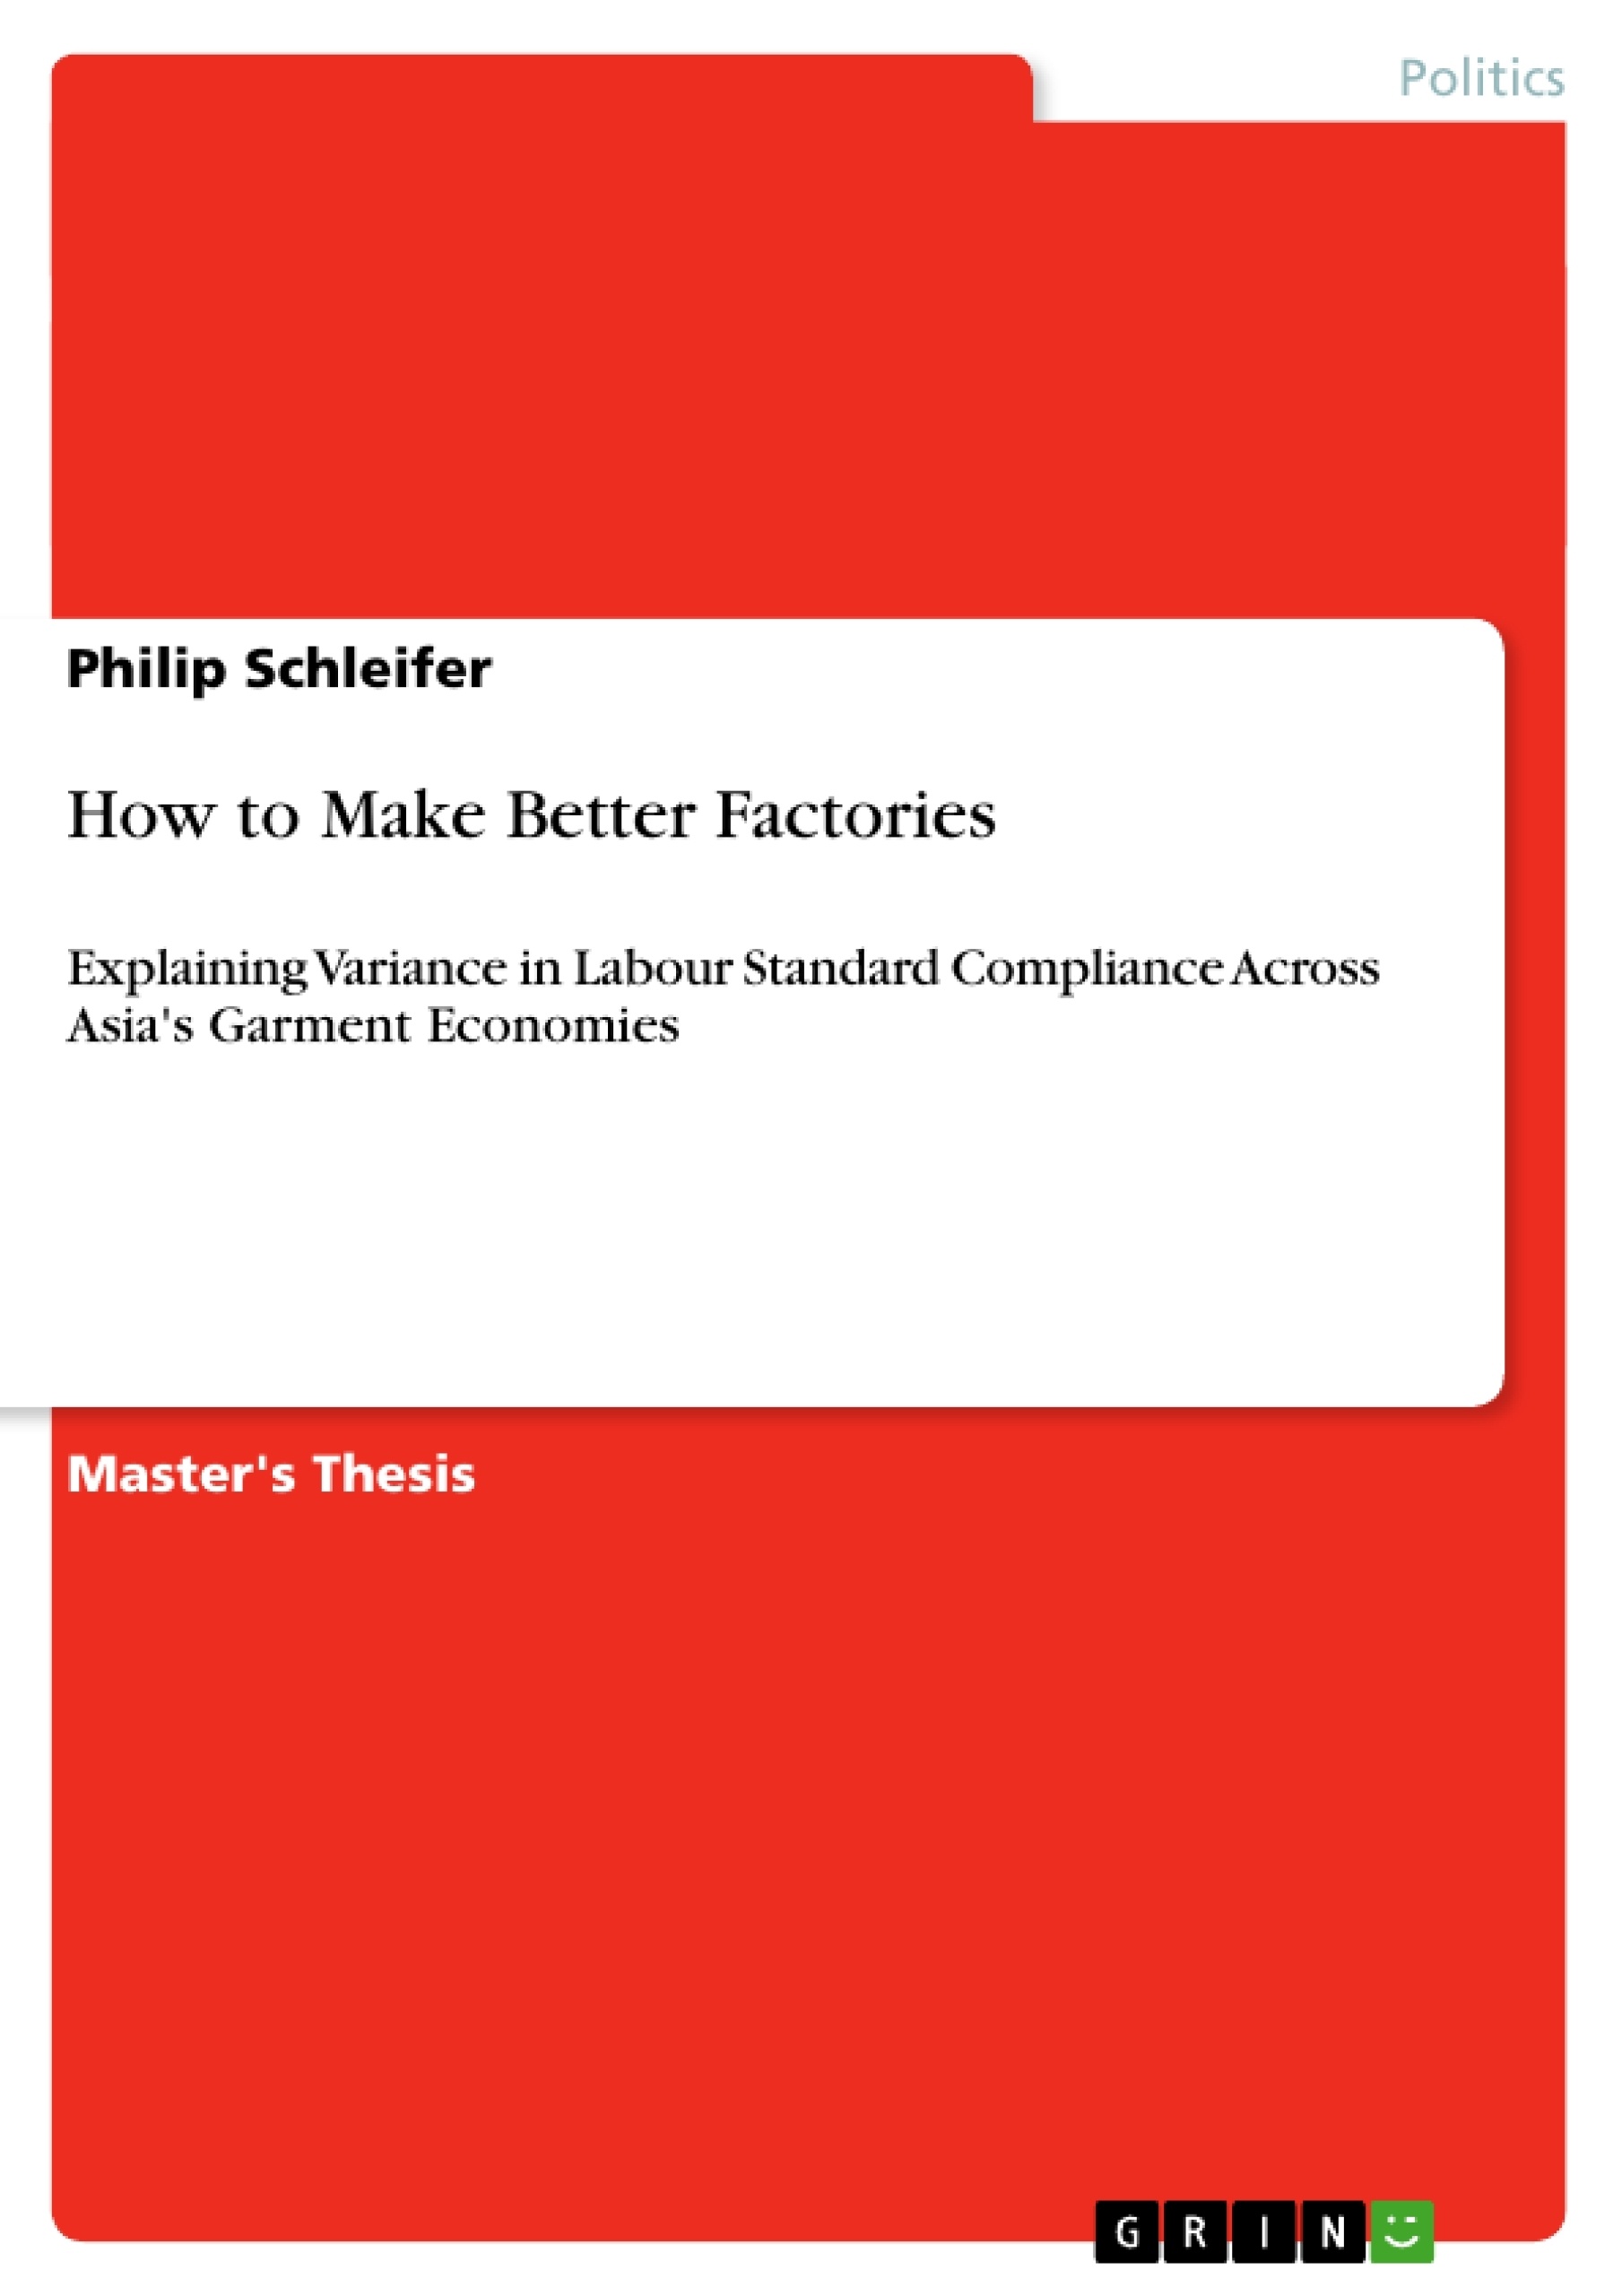 Title: How to Make Better Factories